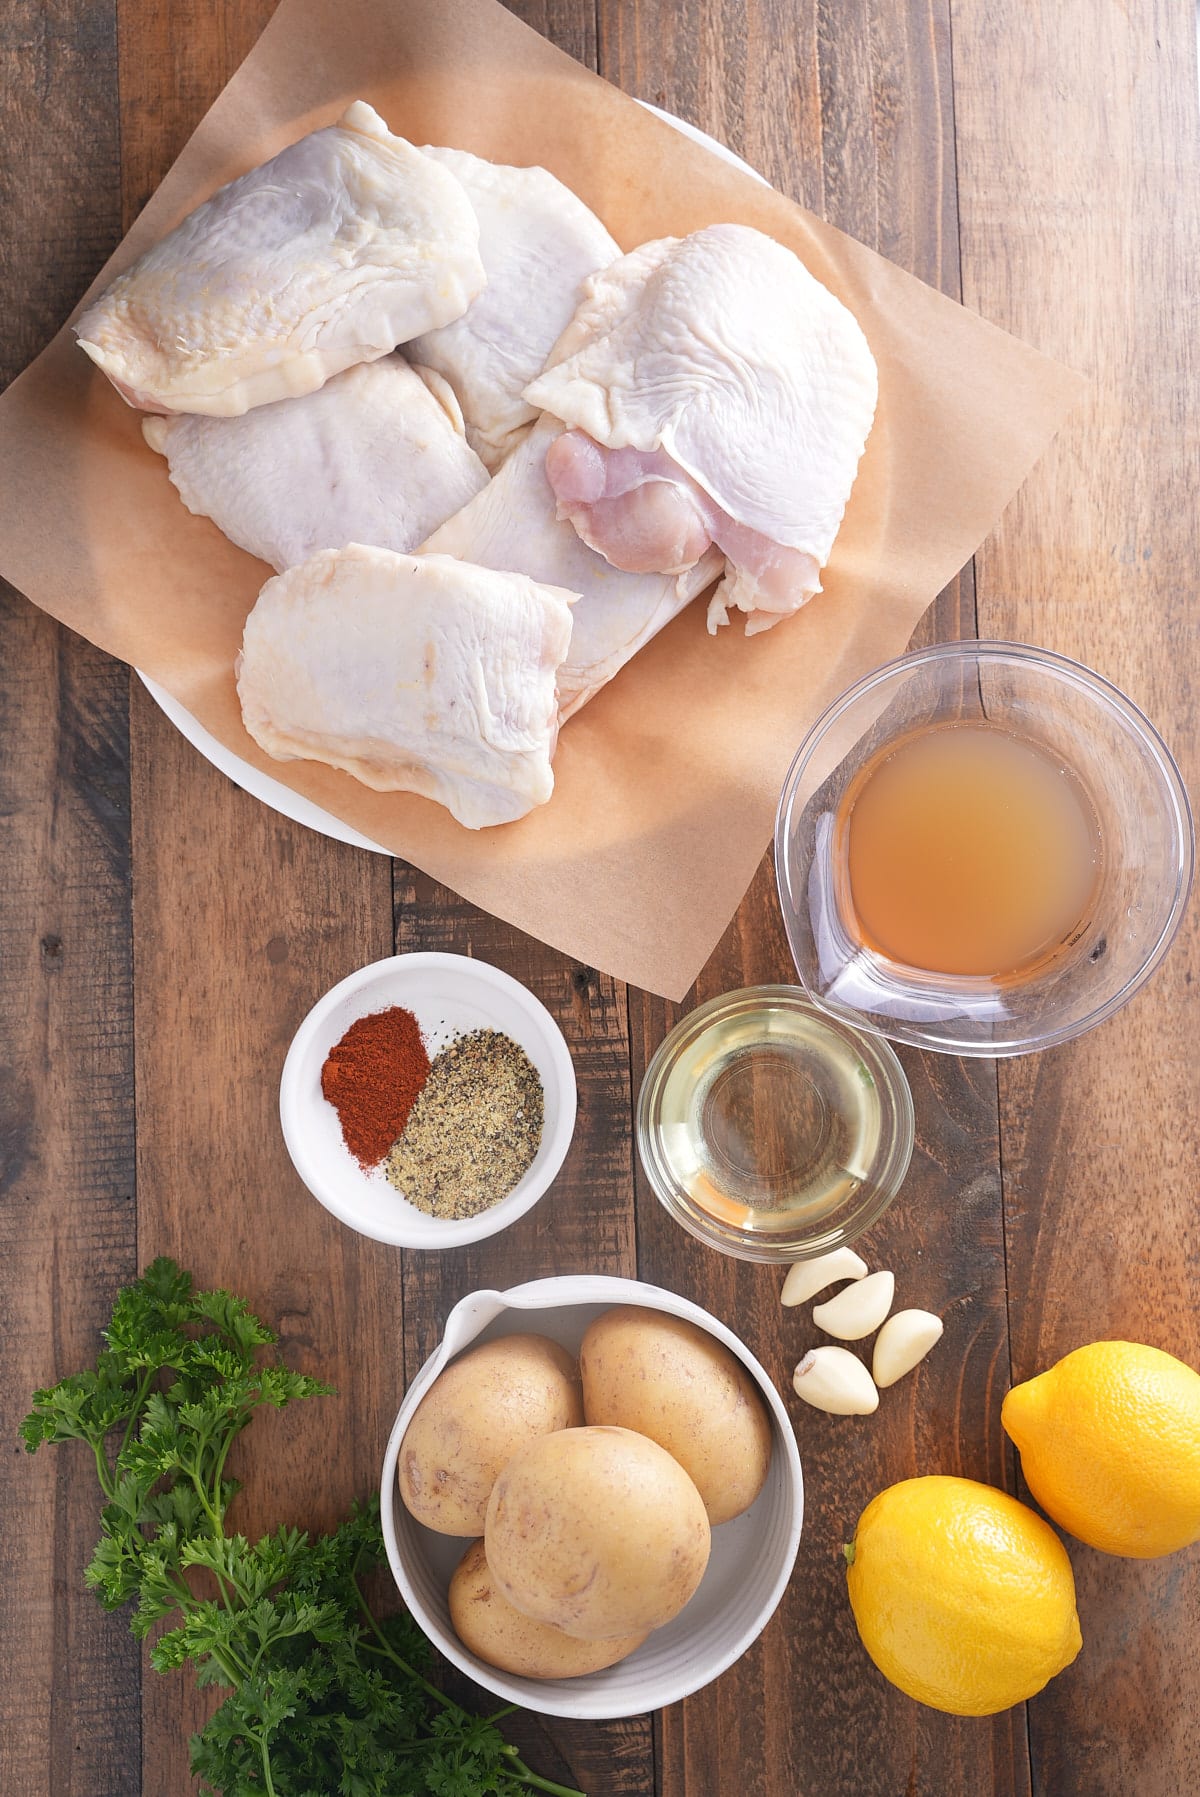 ingredients for braised chicken thighs on wooden table